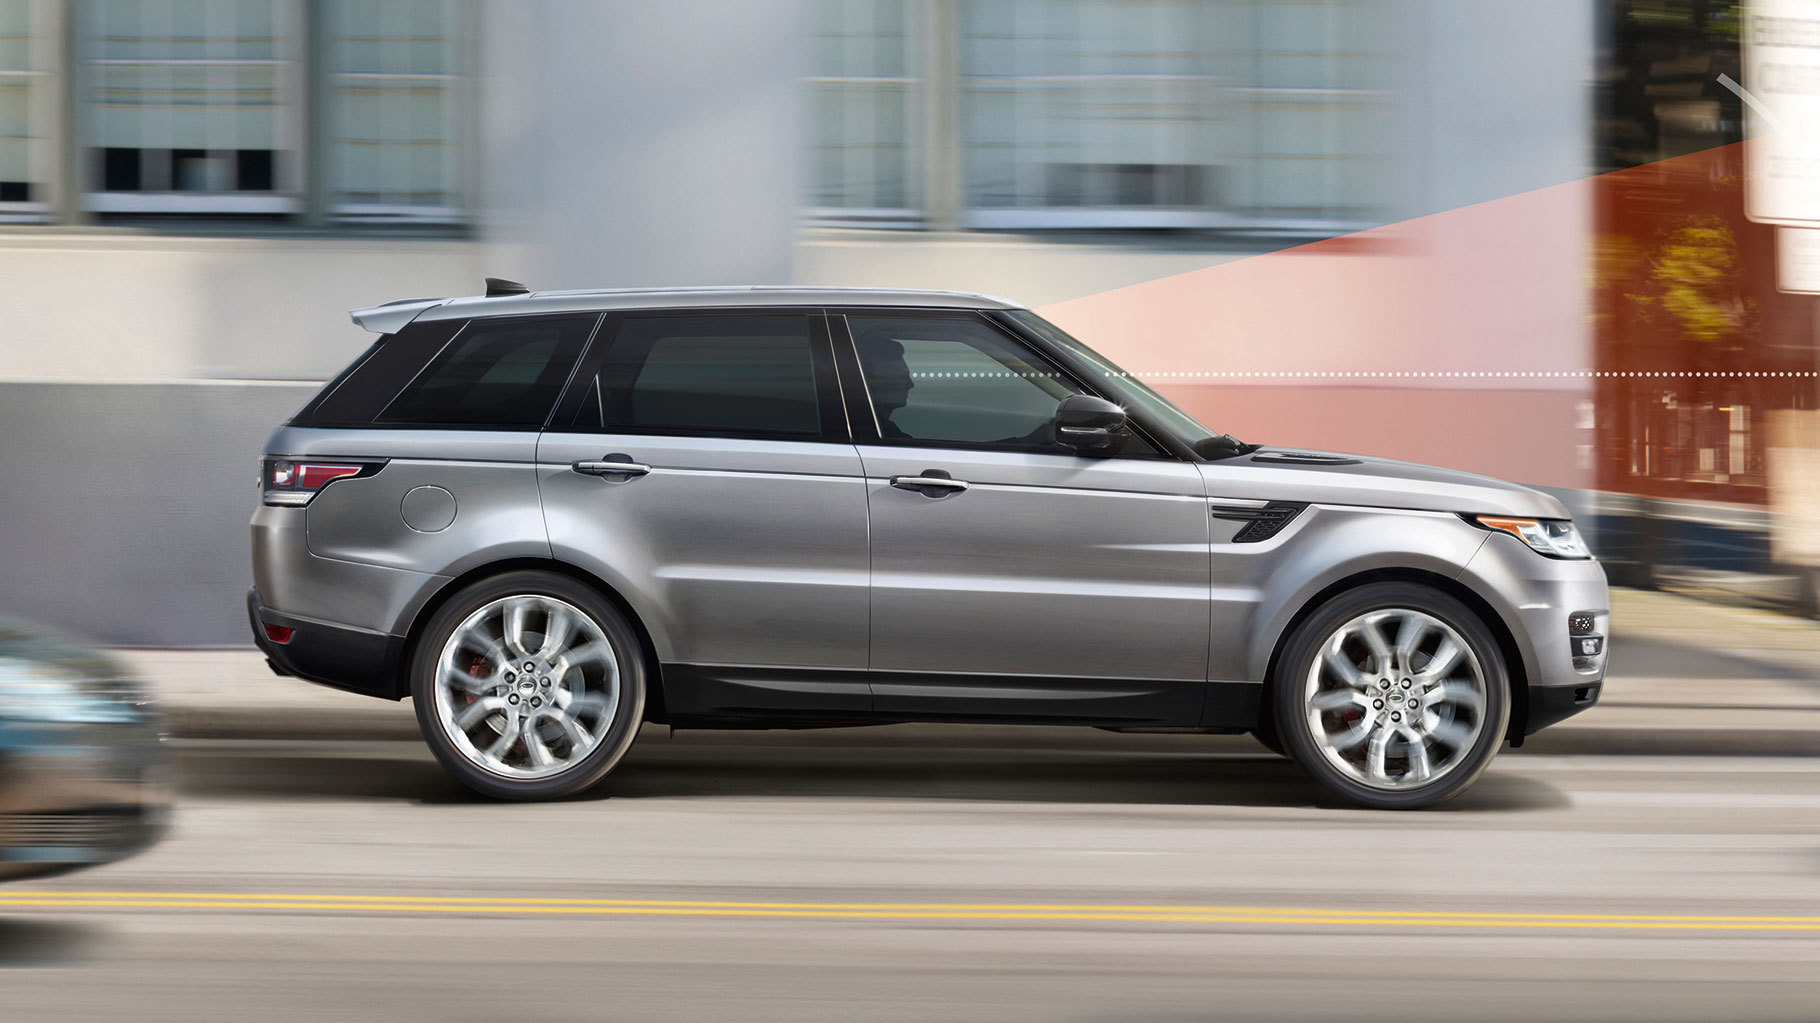 2017 Land Rover Range Rover Sport Specs and Features in Wayne, PA